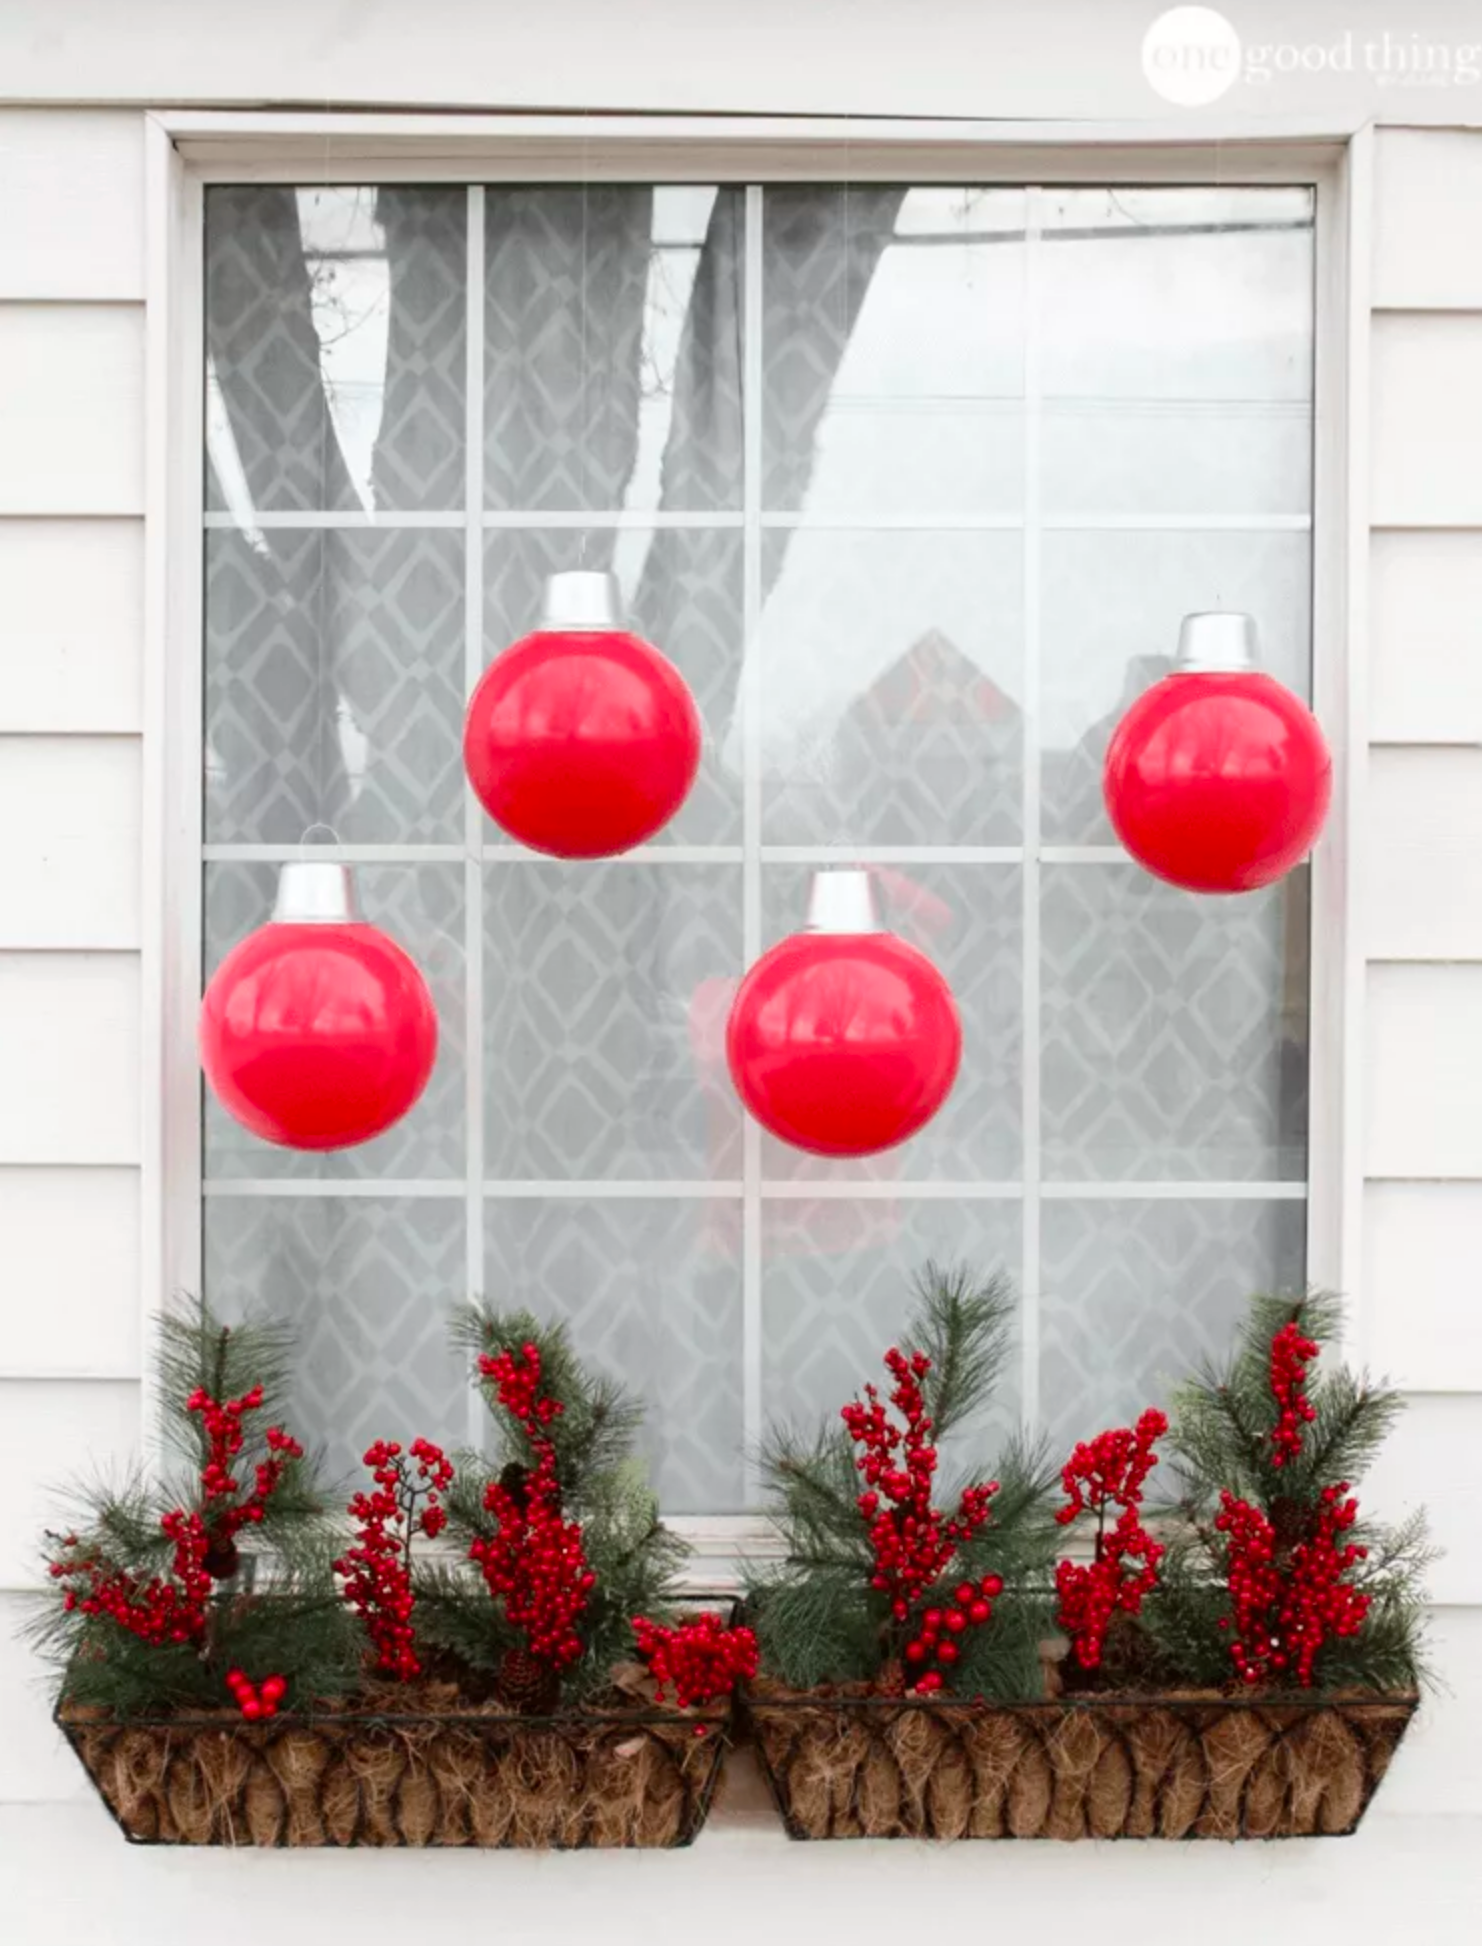 Top tips for creating the perfect Christmas window display